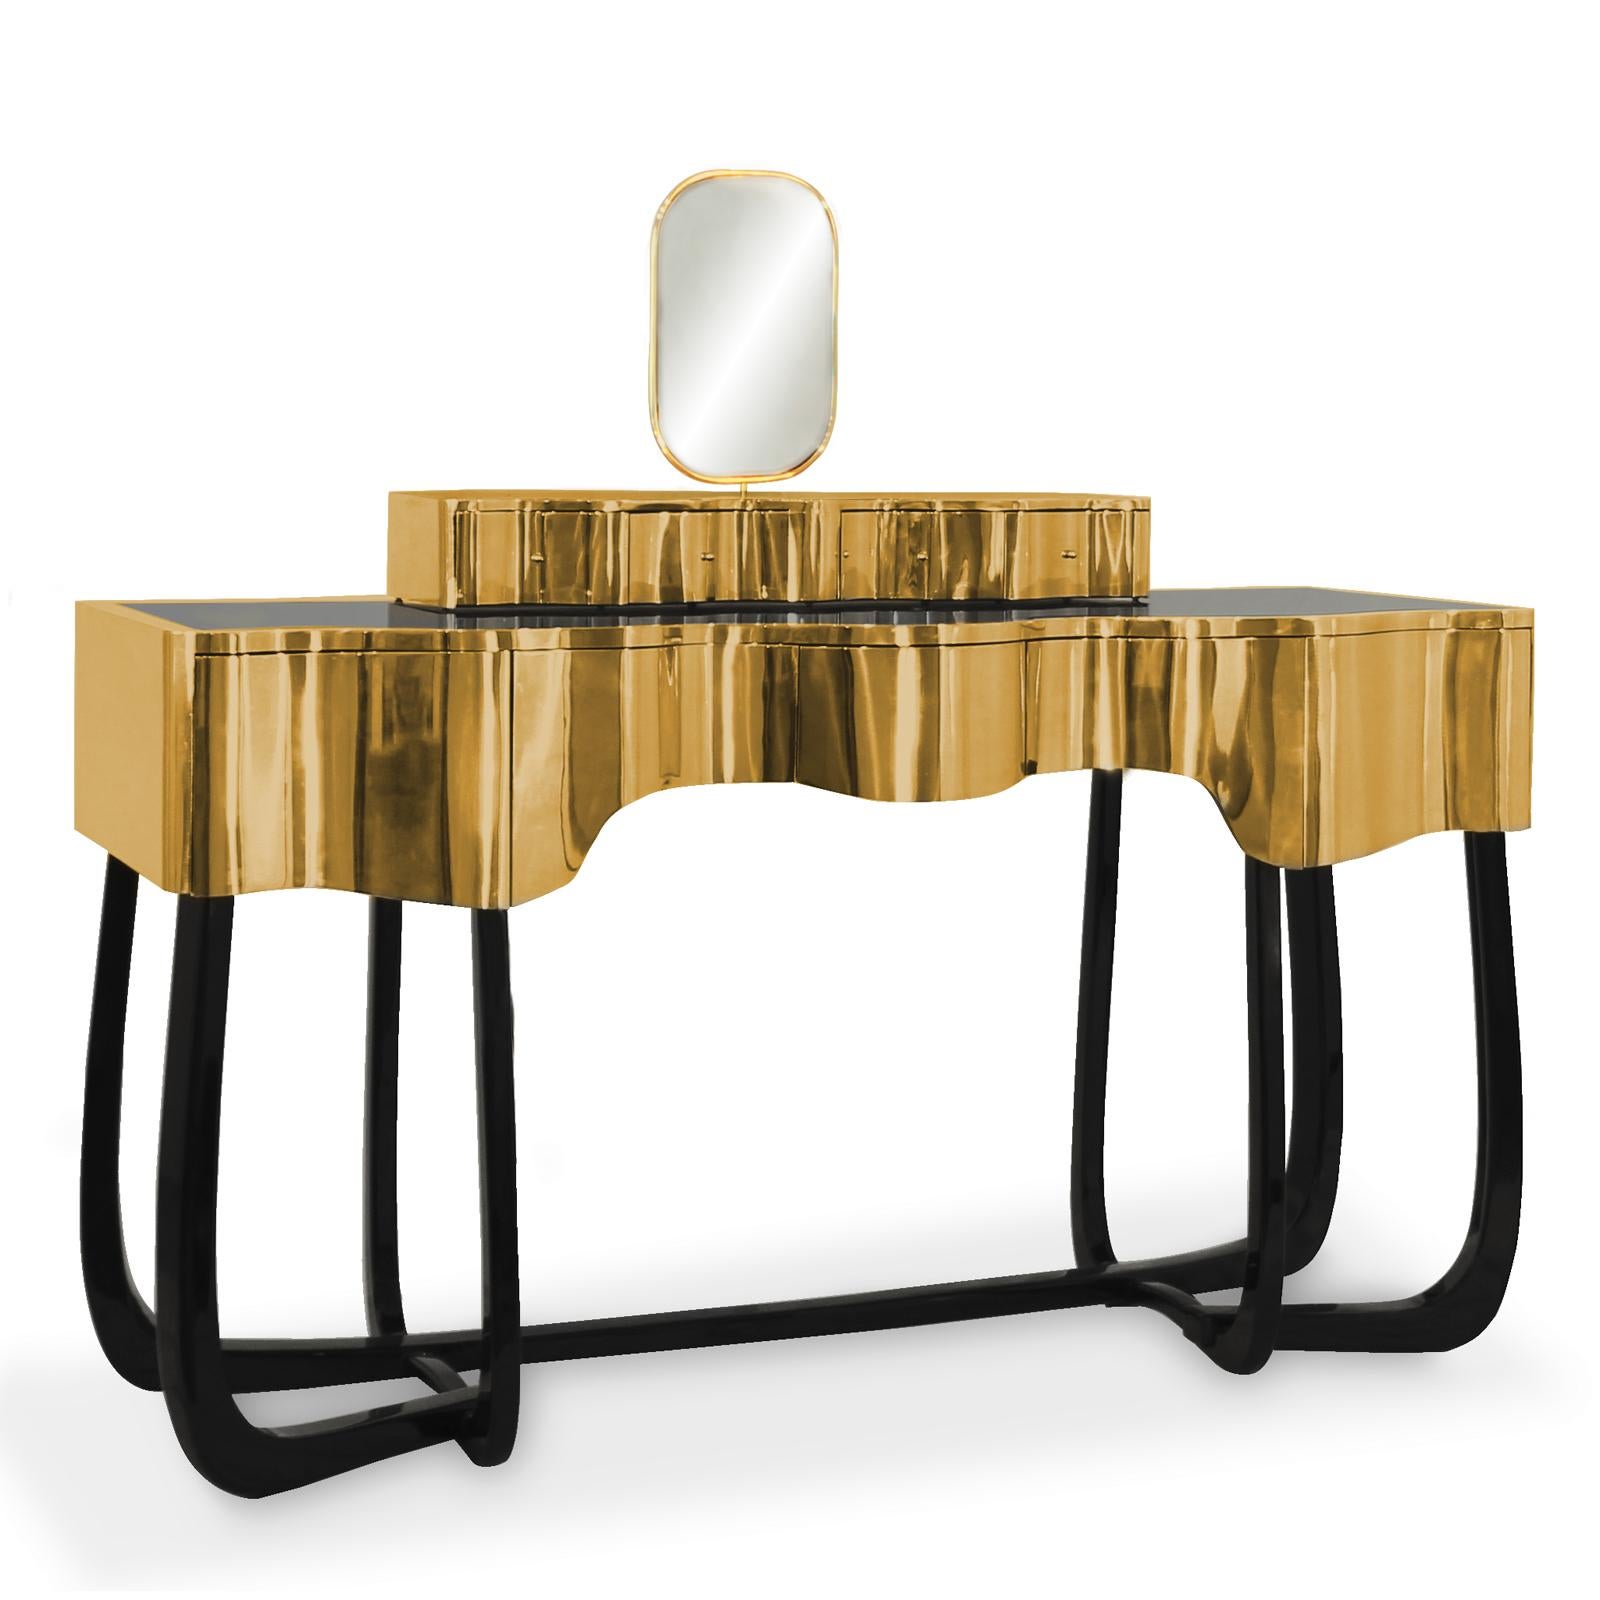 Console table curvy mirror room with structure in wood and
coated with solid polished brass with high gloss varnish. With
4 drawers on the top and with 5 drawers under the top. With
1 mirror with gold plated rim around. With black